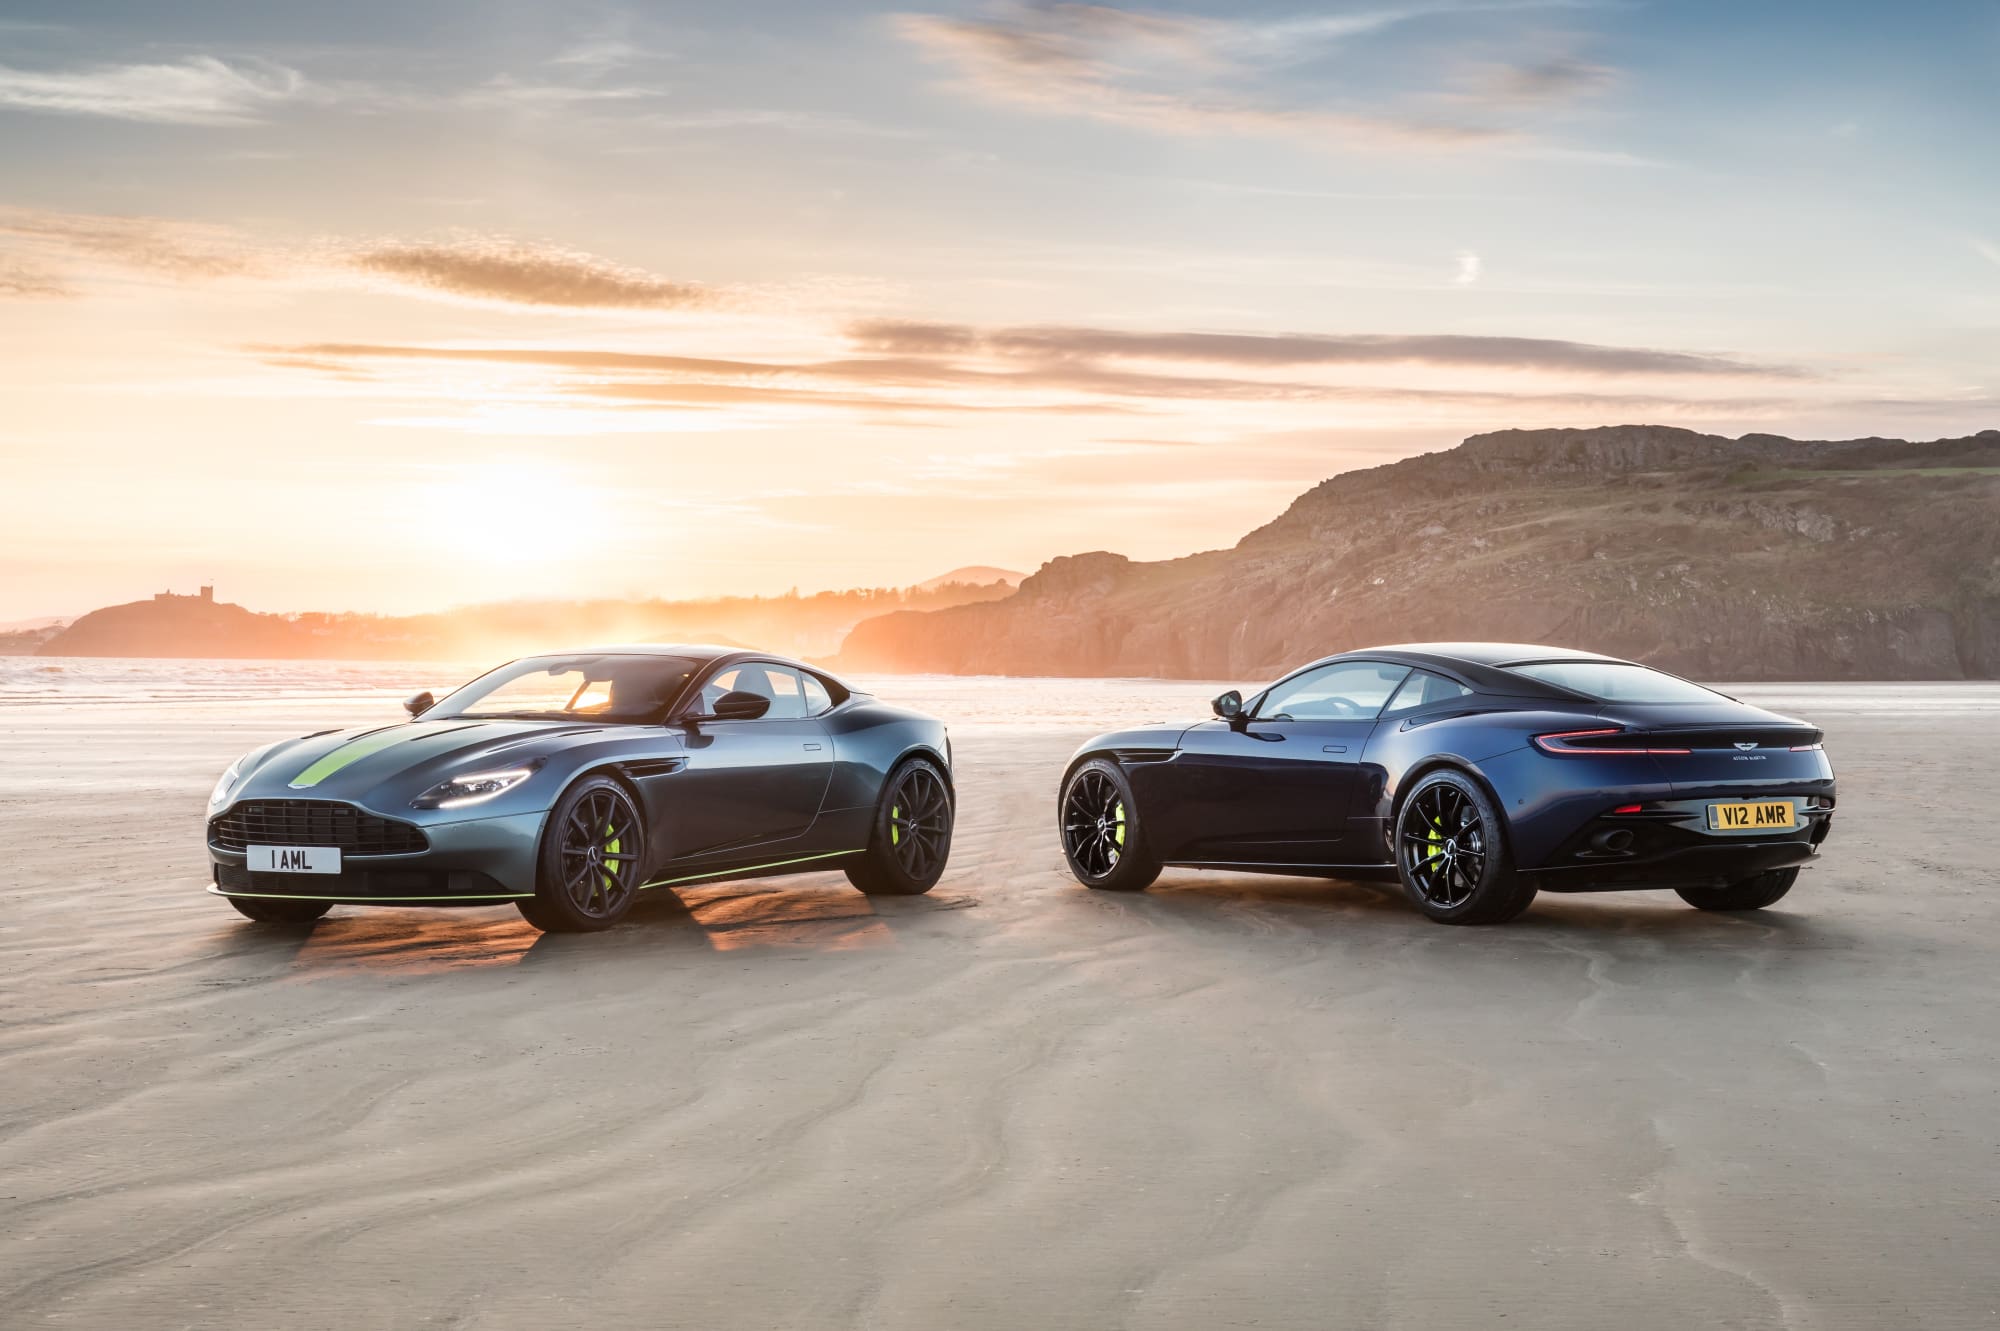 The new Aston Martin special editions, and more car updates this month